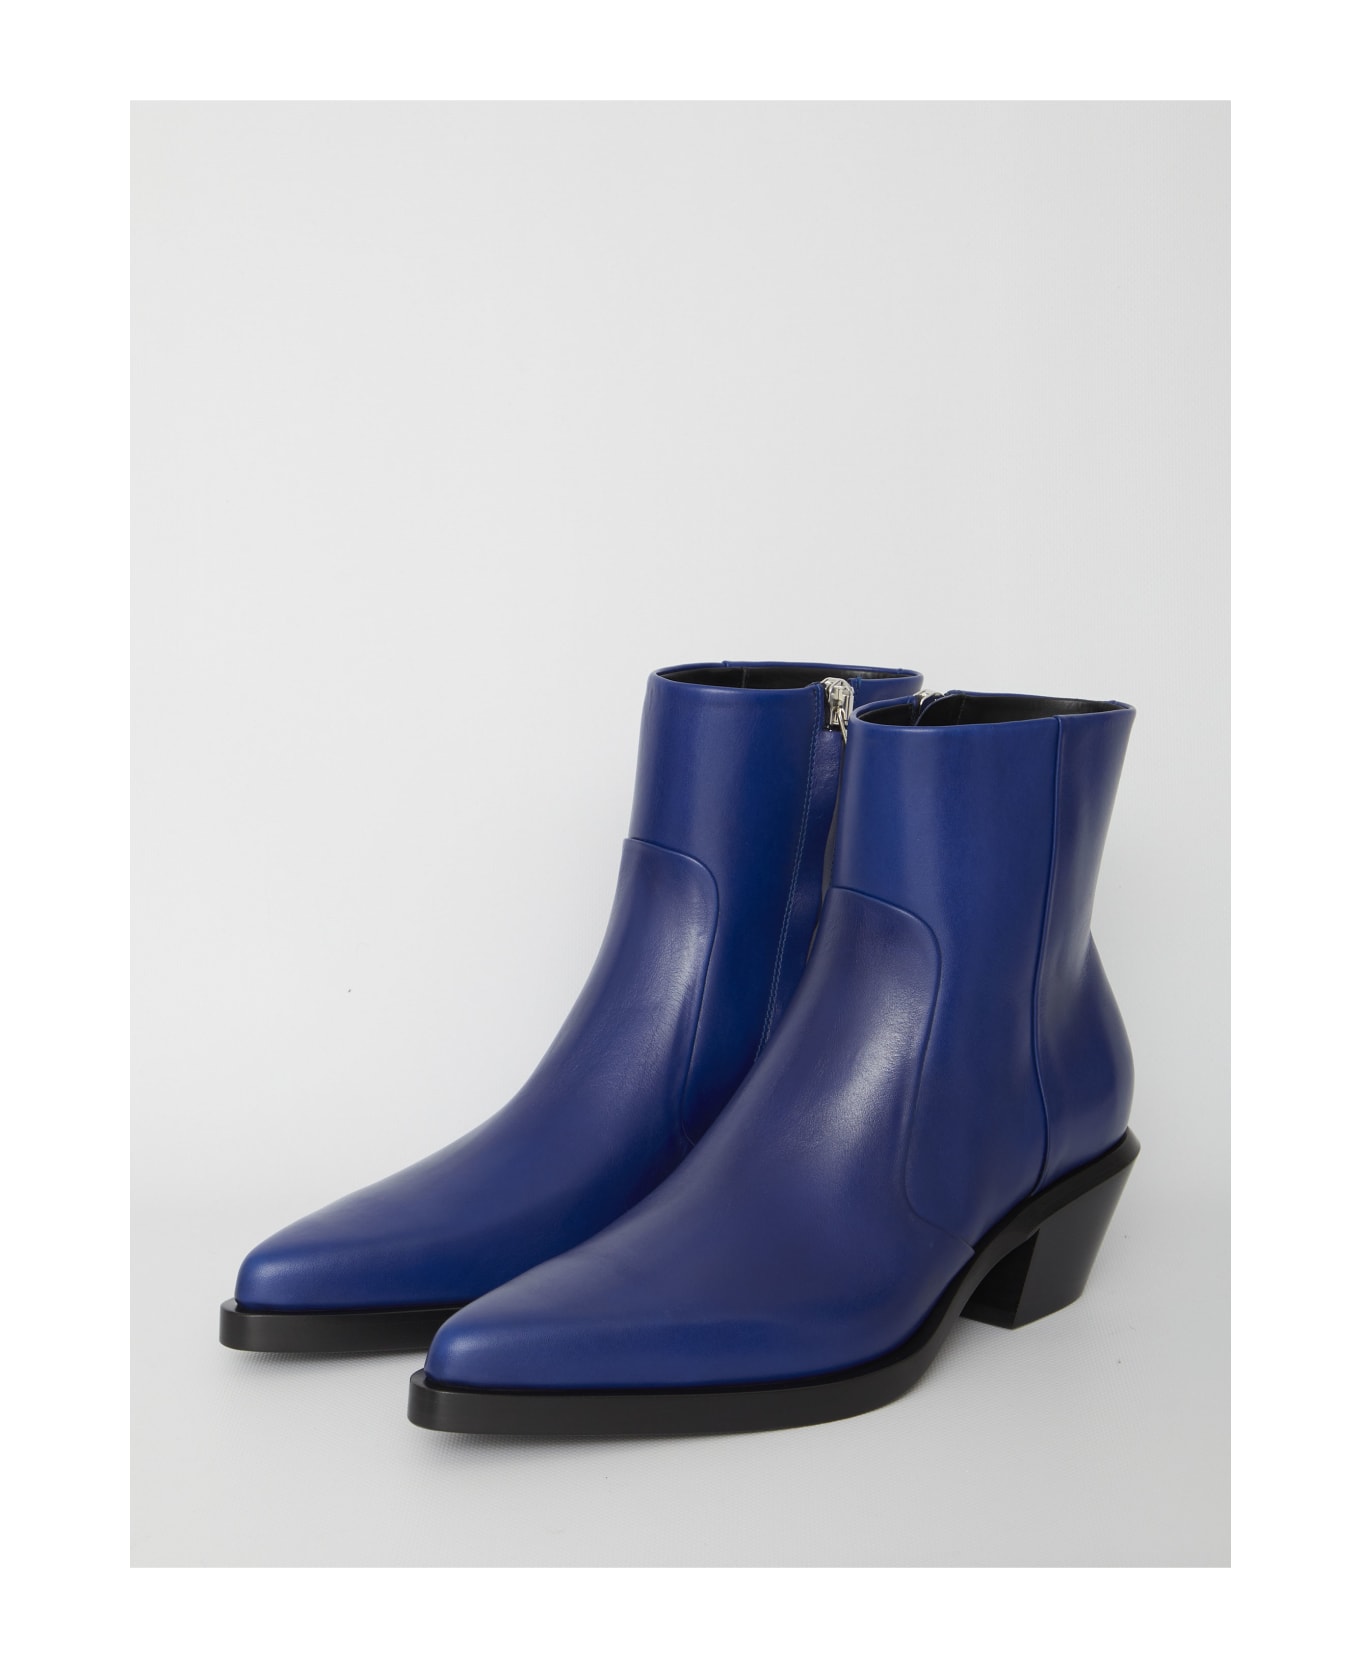 Off-White Slim Texan Ankle Boots - BLUE ブーツ